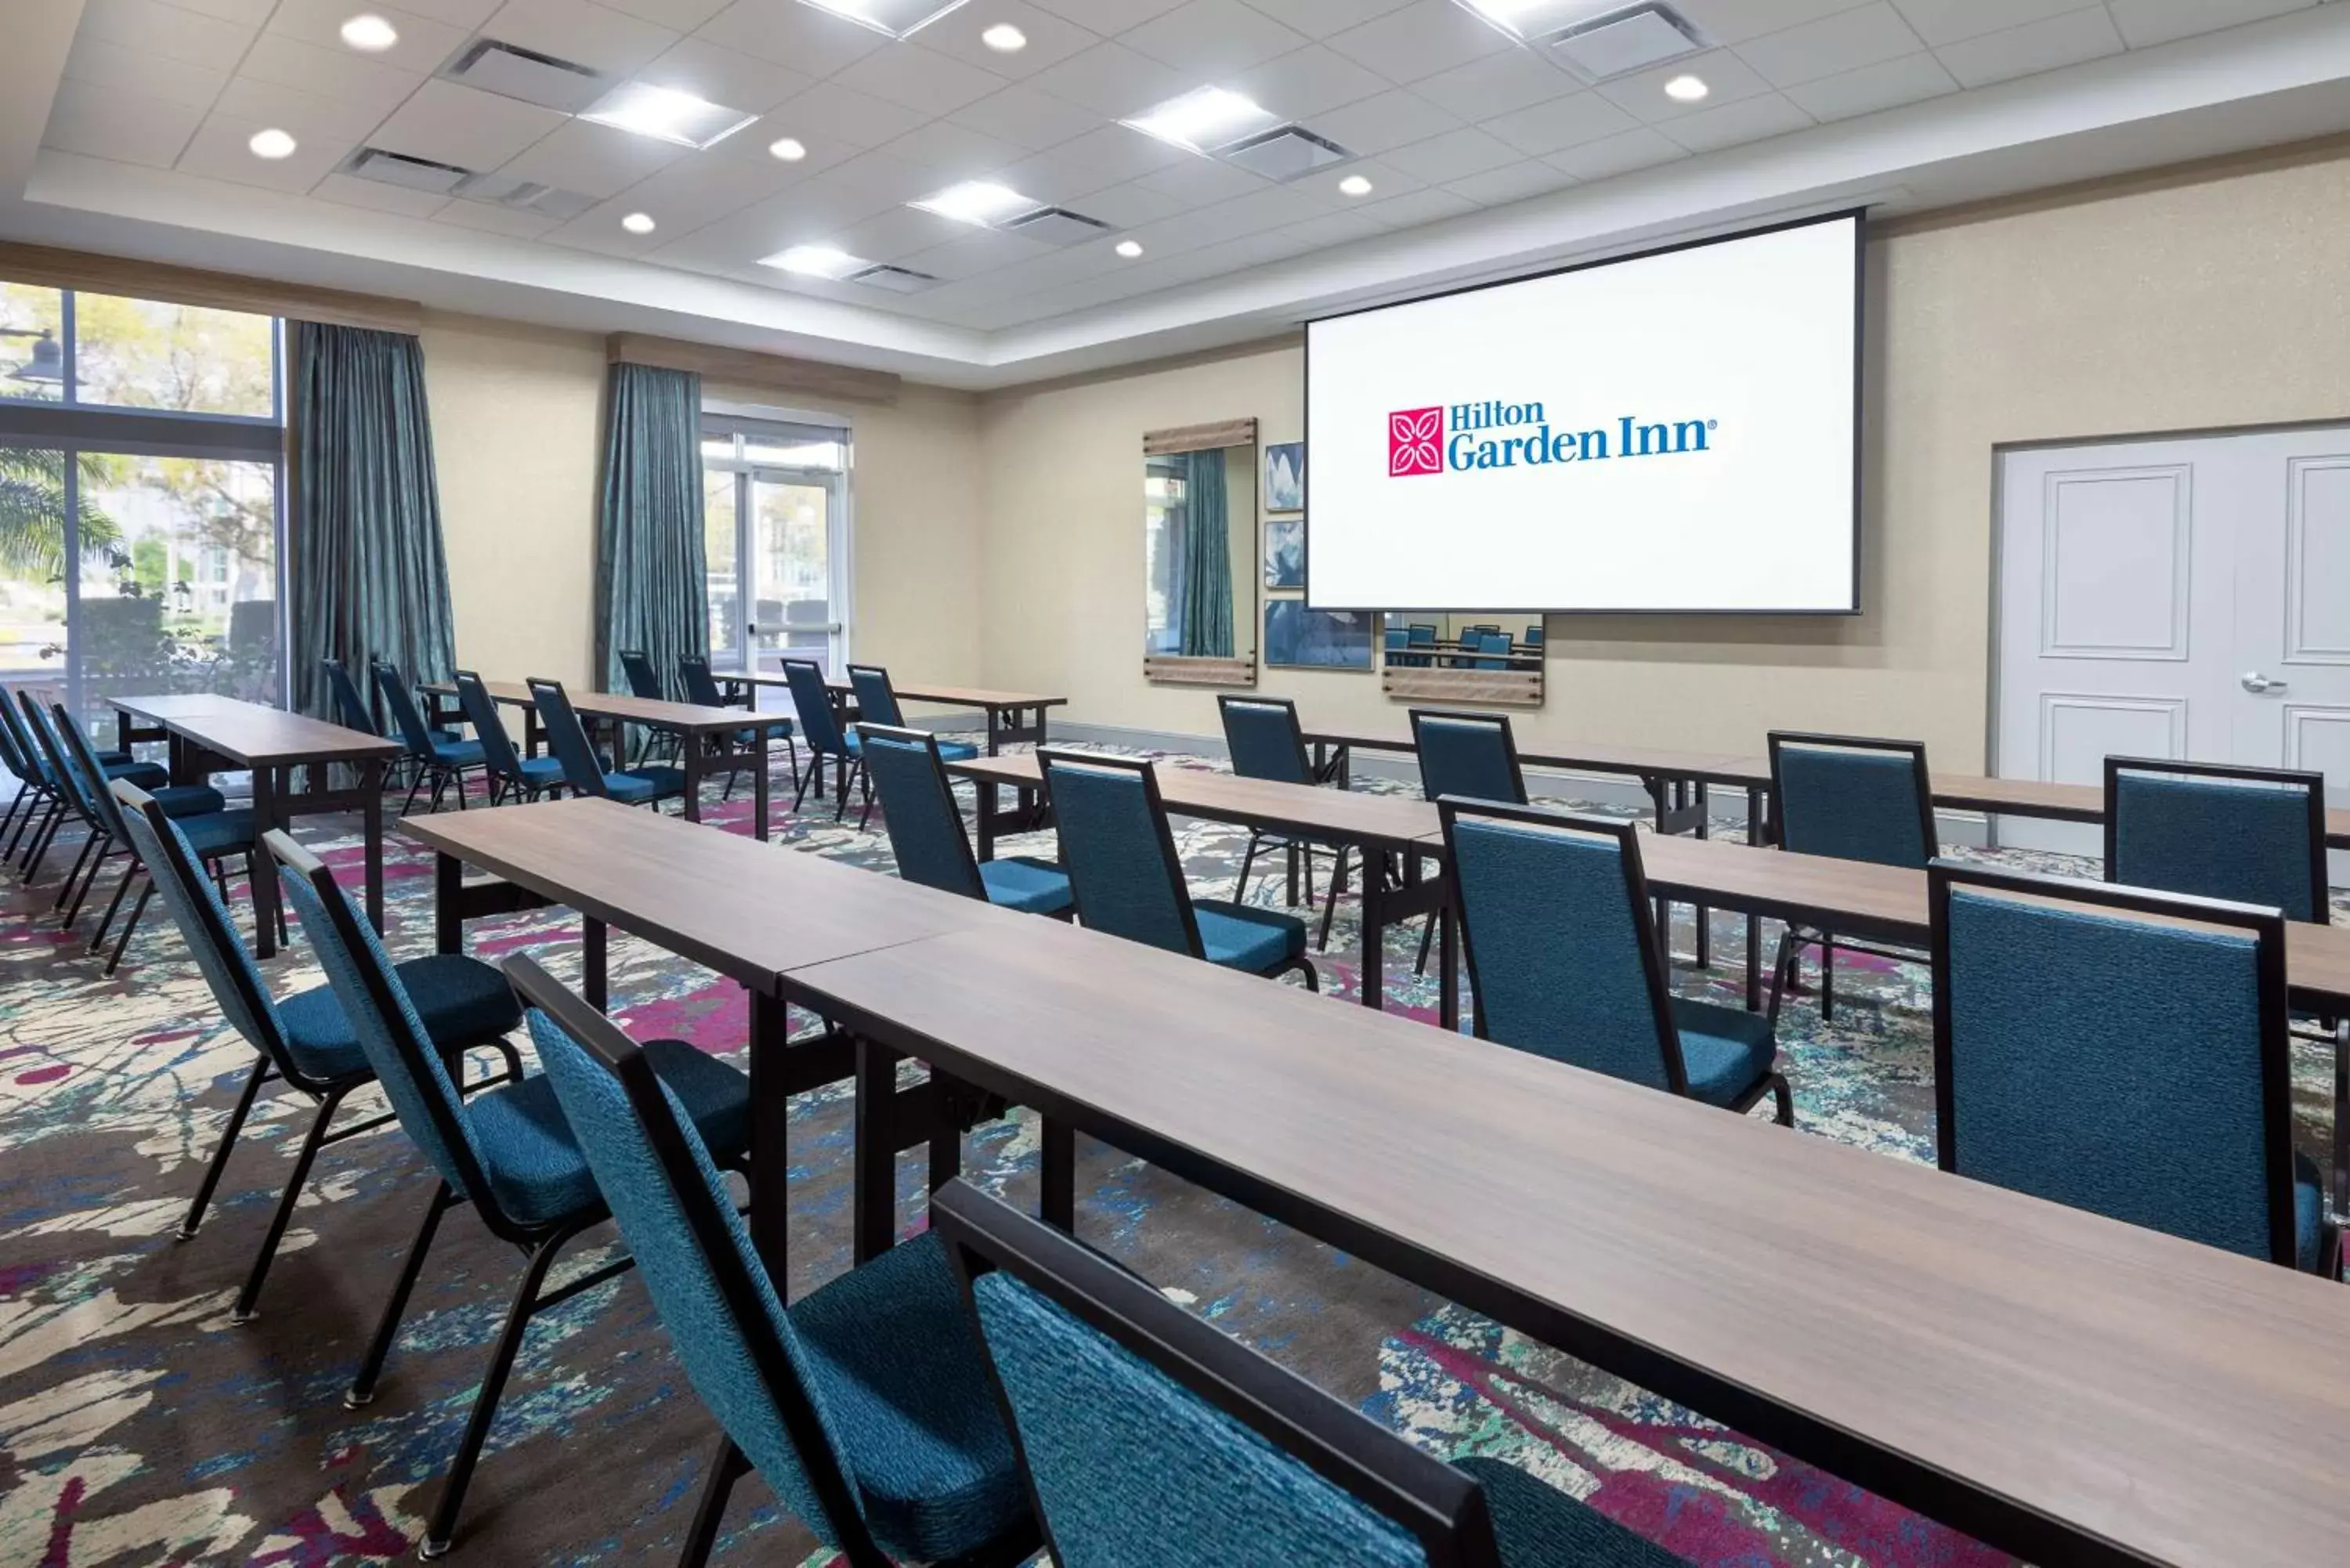 Meeting/conference room in Hilton Garden Inn Tampa Riverview Brandon